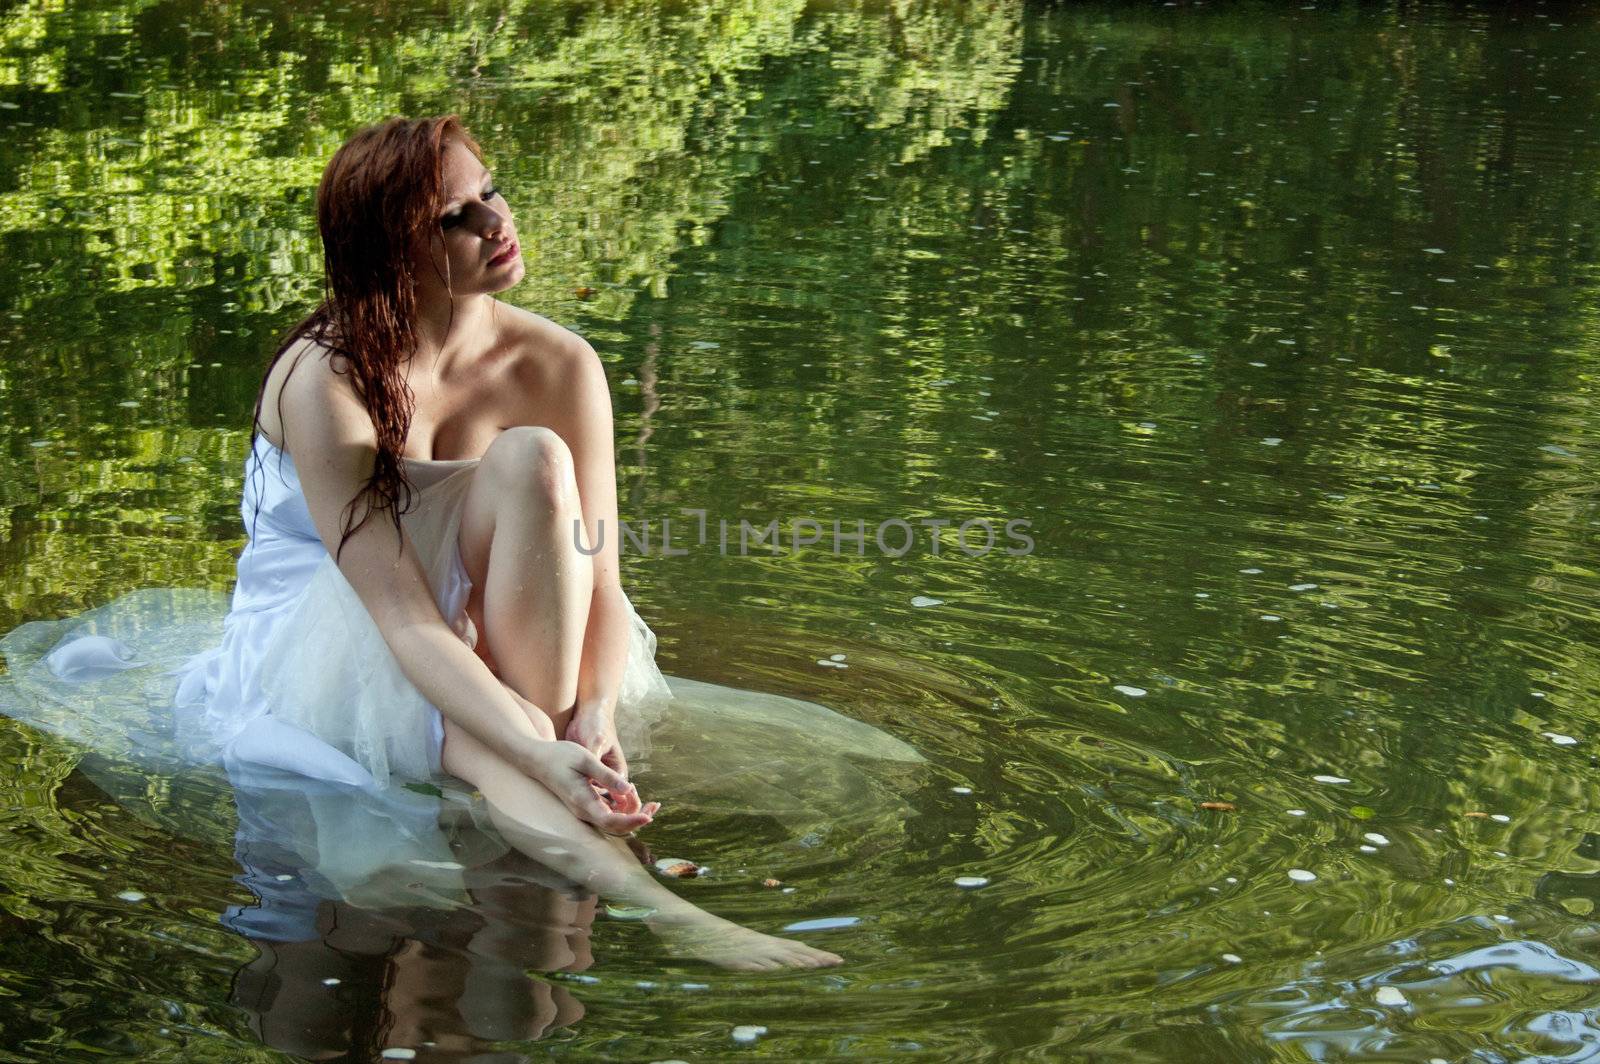 A beautiful bride sitting in water